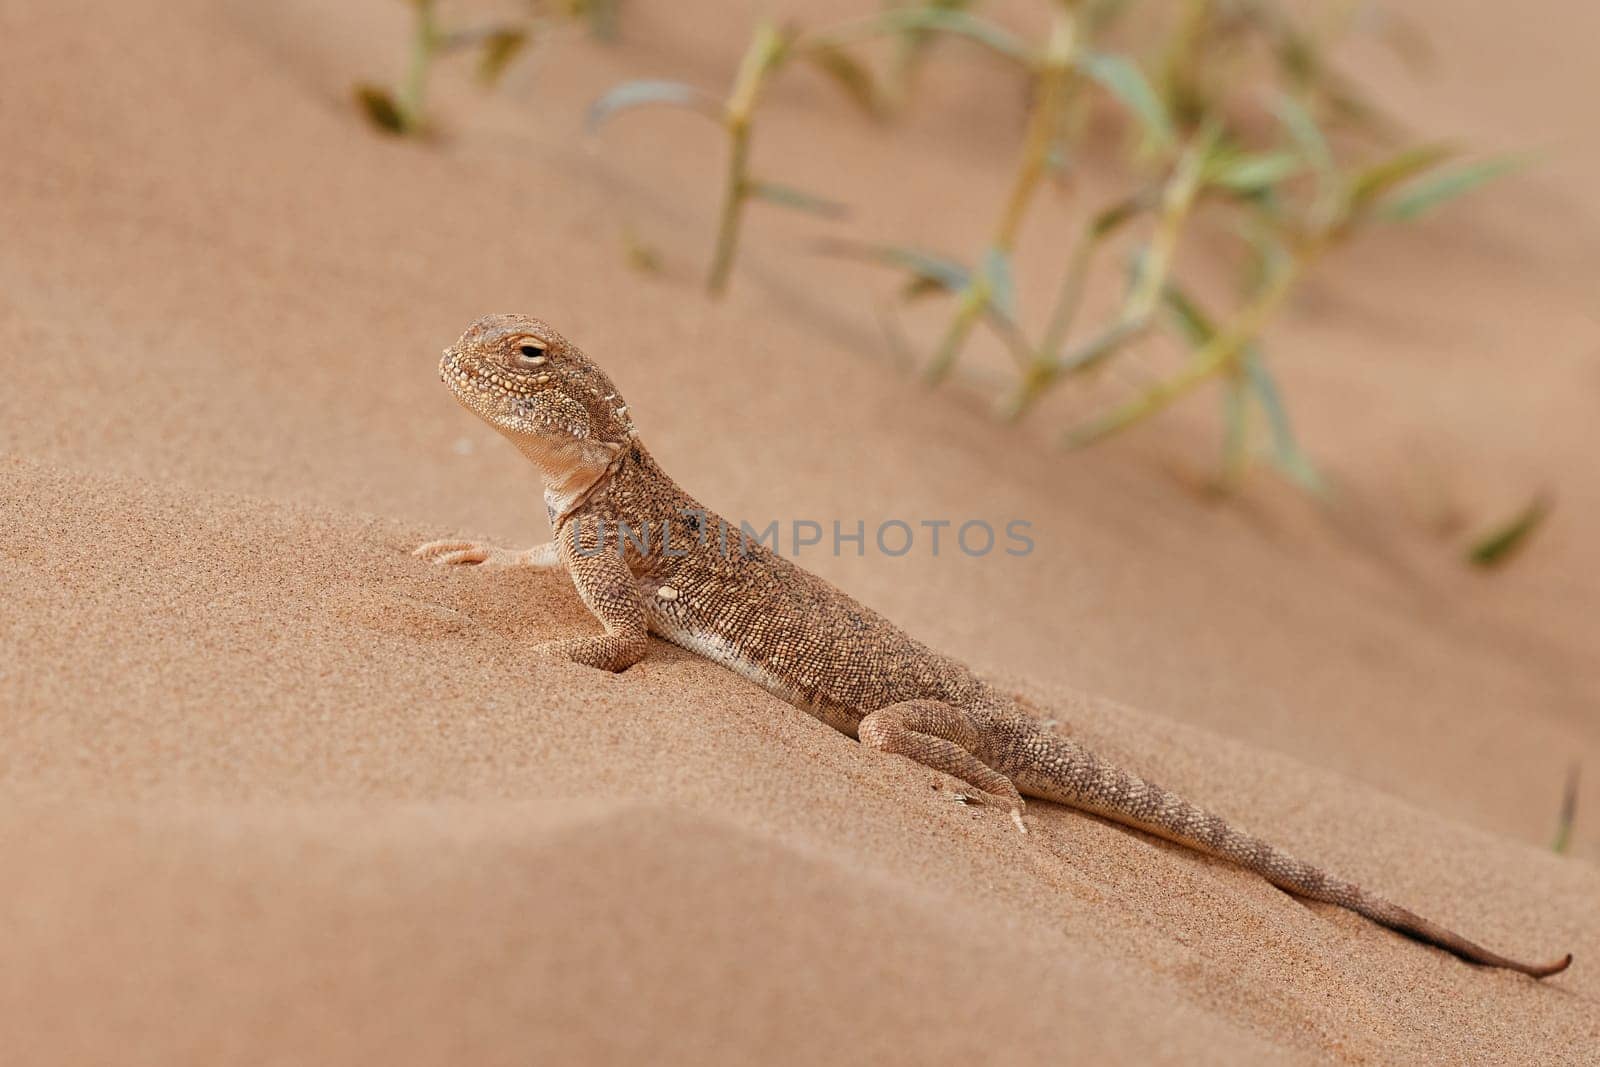 Toad-headed agama, Phrynocephalus mystaceus. Calm desert roundhead lizard on the sand in its natural environment. A living dragon of the desert Close up. incredible desert lizard.